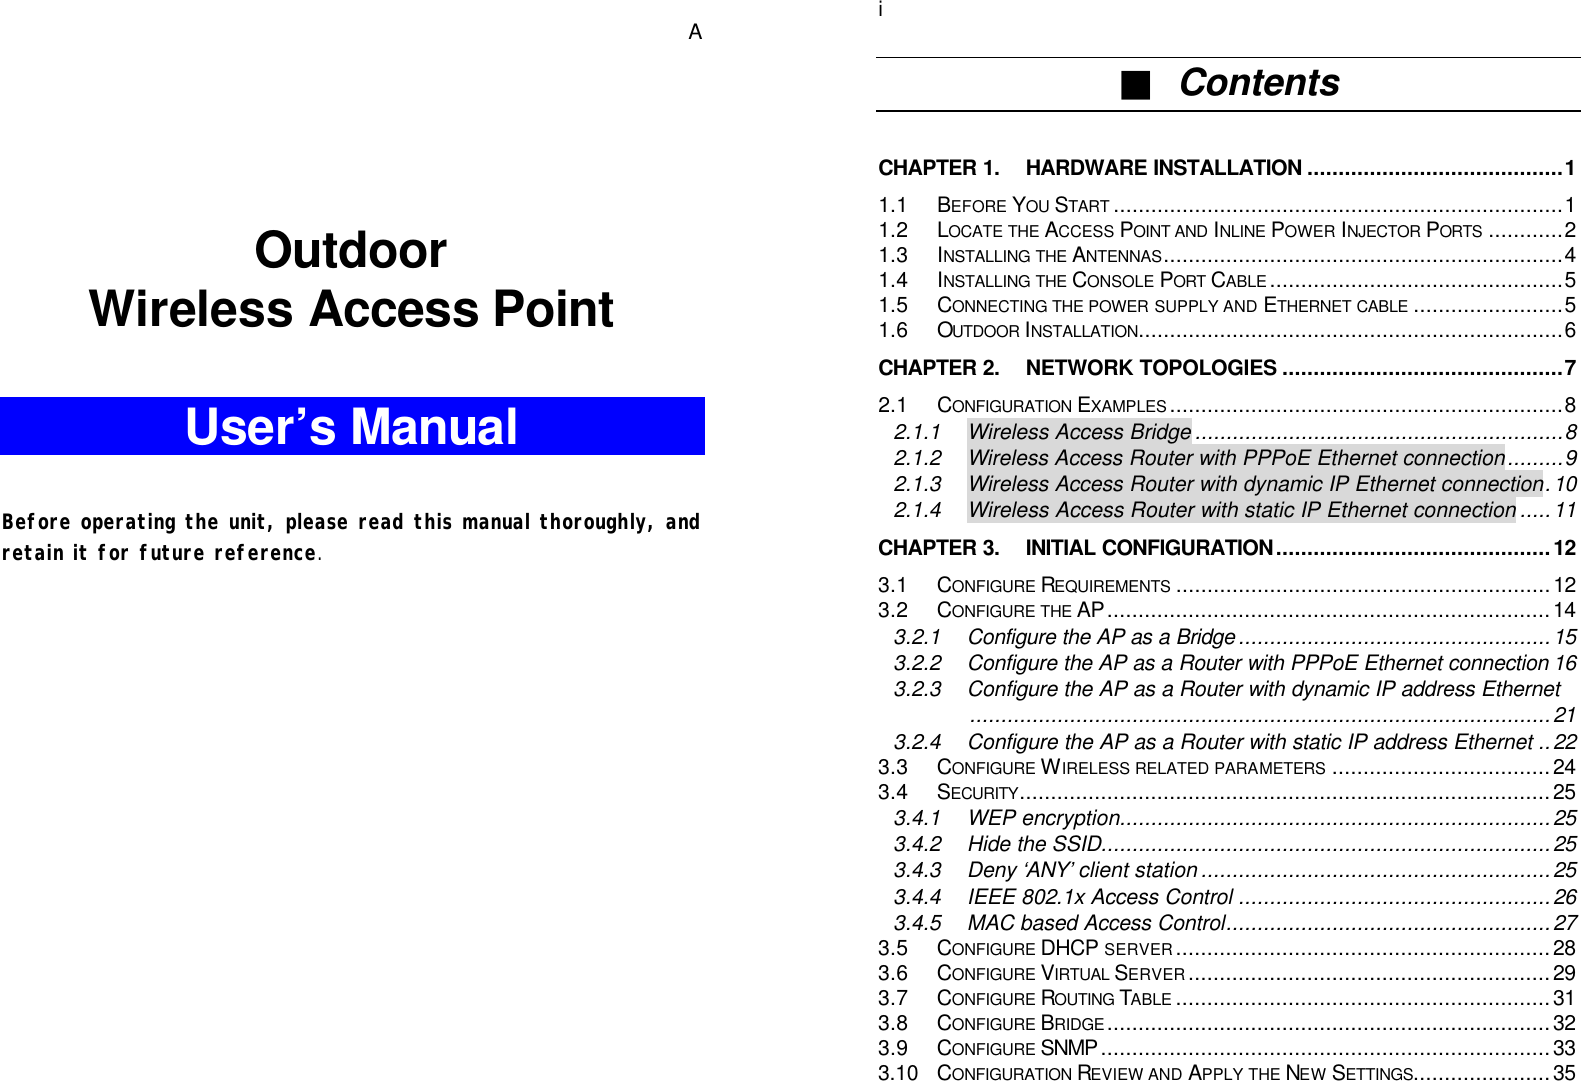   A   Outdoor Wireless Access Point  User’s Manual   Before operating the unit, please read this manual thoroughly, and retain it for future reference.         i■  Contents  CHAPTER 1. HARDWARE INSTALLATION.........................................1 1.1 BEFORE YOU START ........................................................................1 1.2 LOCATE THE ACCESS POINT AND INLINE POWER INJECTOR PORTS ............2 1.3 INSTALLING THE ANTENNAS................................................................4 1.4 INSTALLING THE CONSOLE PORT CABLE...............................................5 1.5 CONNECTING THE POWER SUPPLY AND ETHERNET CABLE ........................5 1.6 OUTDOOR INSTALLATION....................................................................6 CHAPTER 2. NETWORK TOPOLOGIES .............................................7 2.1 CONFIGURATION EXAMPLES...............................................................8 2.1.1 Wireless Access Bridge ...........................................................8 2.1.2 Wireless Access Router with PPPoE Ethernet connection.........9 2.1.3 Wireless Access Router with dynamic IP Ethernet connection.10 2.1.4 Wireless Access Router with static IP Ethernet connection .....11 CHAPTER 3. INITIAL CONFIGURATION............................................12 3.1 CONFIGURE REQUIREMENTS ............................................................12 3.2 CONFIGURE THE AP.......................................................................14 3.2.1 Configure the AP as a Bridge ..................................................15 3.2.2 Configure the AP as a Router with PPPoE Ethernet connection 16 3.2.3 Configure the AP as a Router with dynamic IP address Ethernet.............................................................................................21 3.2.4 Configure the AP as a Router with static IP address Ethernet ..22 3.3 CONFIGURE WIRELESS RELATED PARAMETERS ...................................24 3.4 SECURITY.....................................................................................25 3.4.1 WEP encryption.....................................................................25 3.4.2 Hide the SSID........................................................................25 3.4.3 Deny ‘ANY’ client station ........................................................25 3.4.4 IEEE 802.1x Access Control ..................................................26 3.4.5 MAC based Access Control....................................................27 3.5 CONFIGURE DHCP SERVER............................................................28 3.6 CONFIGURE VIRTUAL SERVER..........................................................29 3.7 CONFIGURE ROUTING TABLE ............................................................31 3.8 CONFIGURE BRIDGE.......................................................................32 3.9 CONFIGURE SNMP ........................................................................33 3.10 CONFIGURATION REVIEW AND APPLY THE NEW SETTINGS......................35 